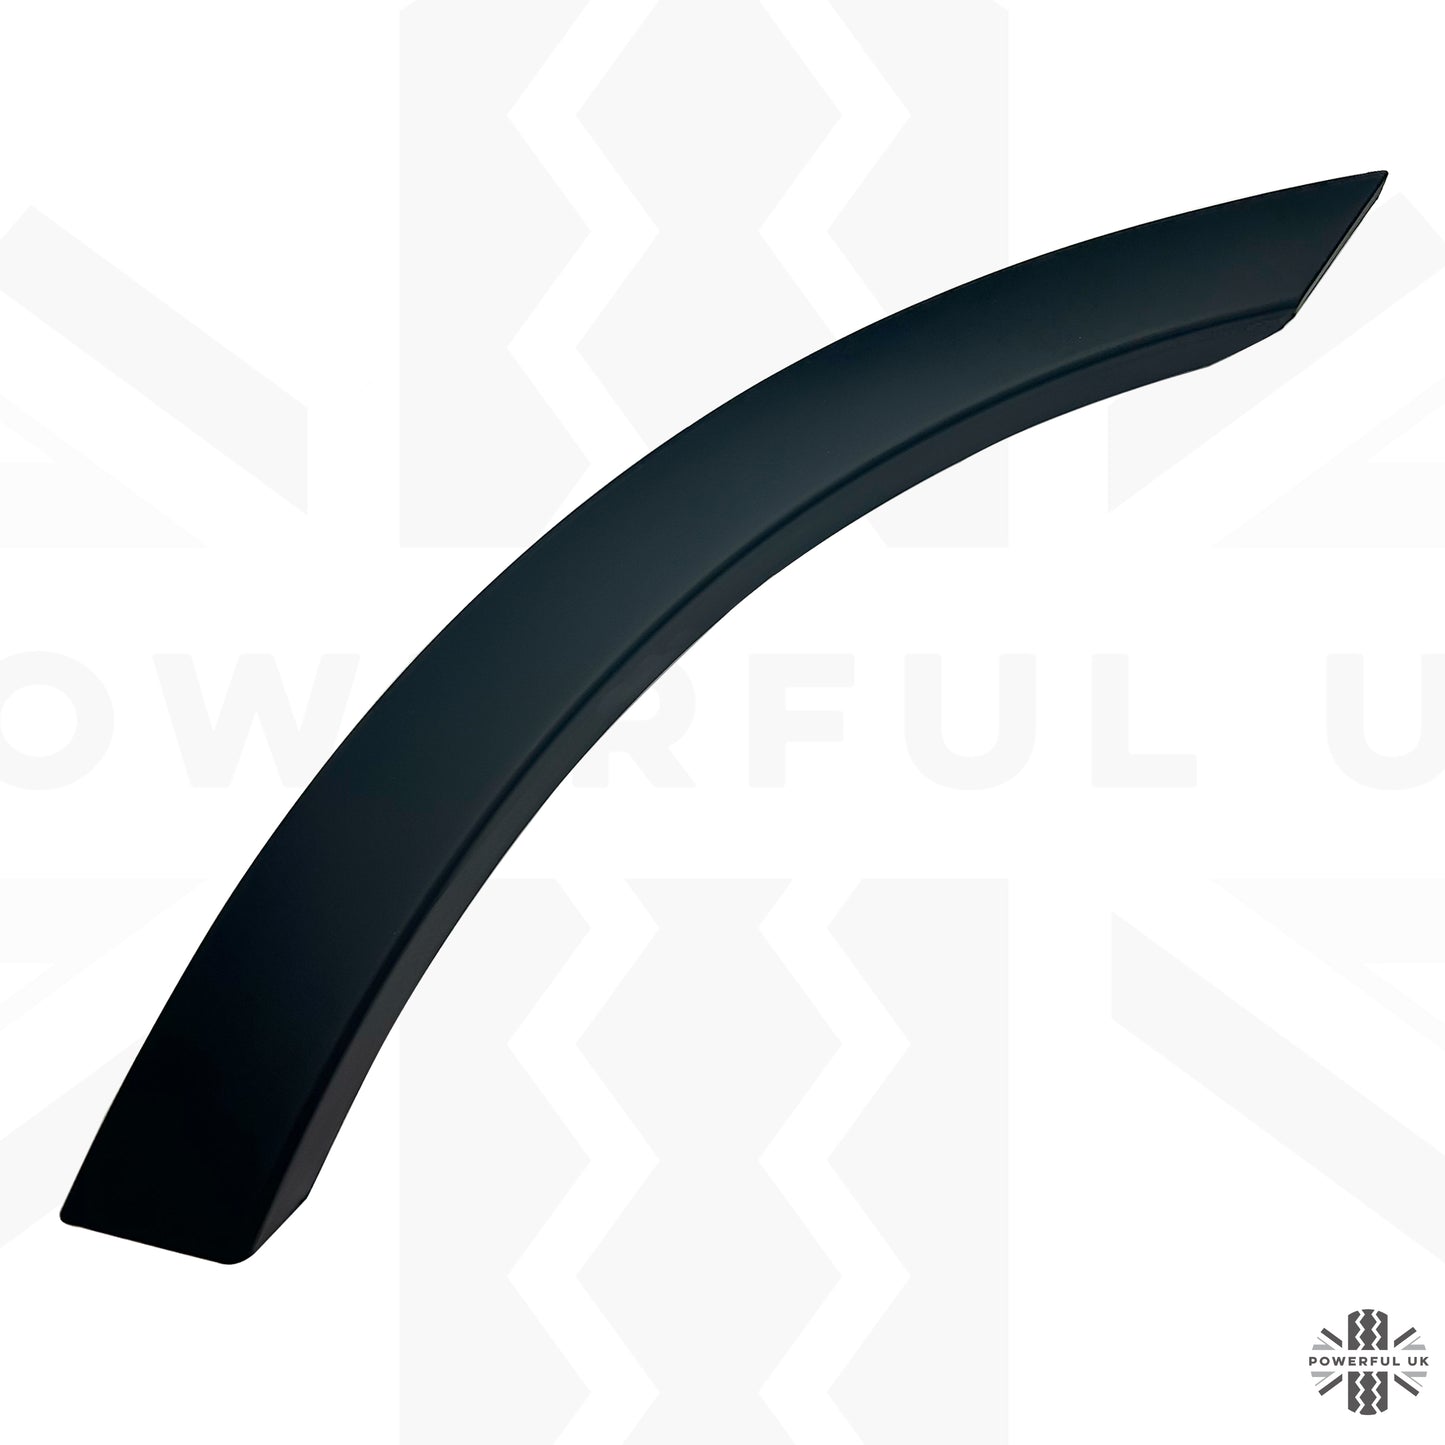 Rear Passenger Door Wheel Arch Trim for Land Rover Discovery Sport - Left